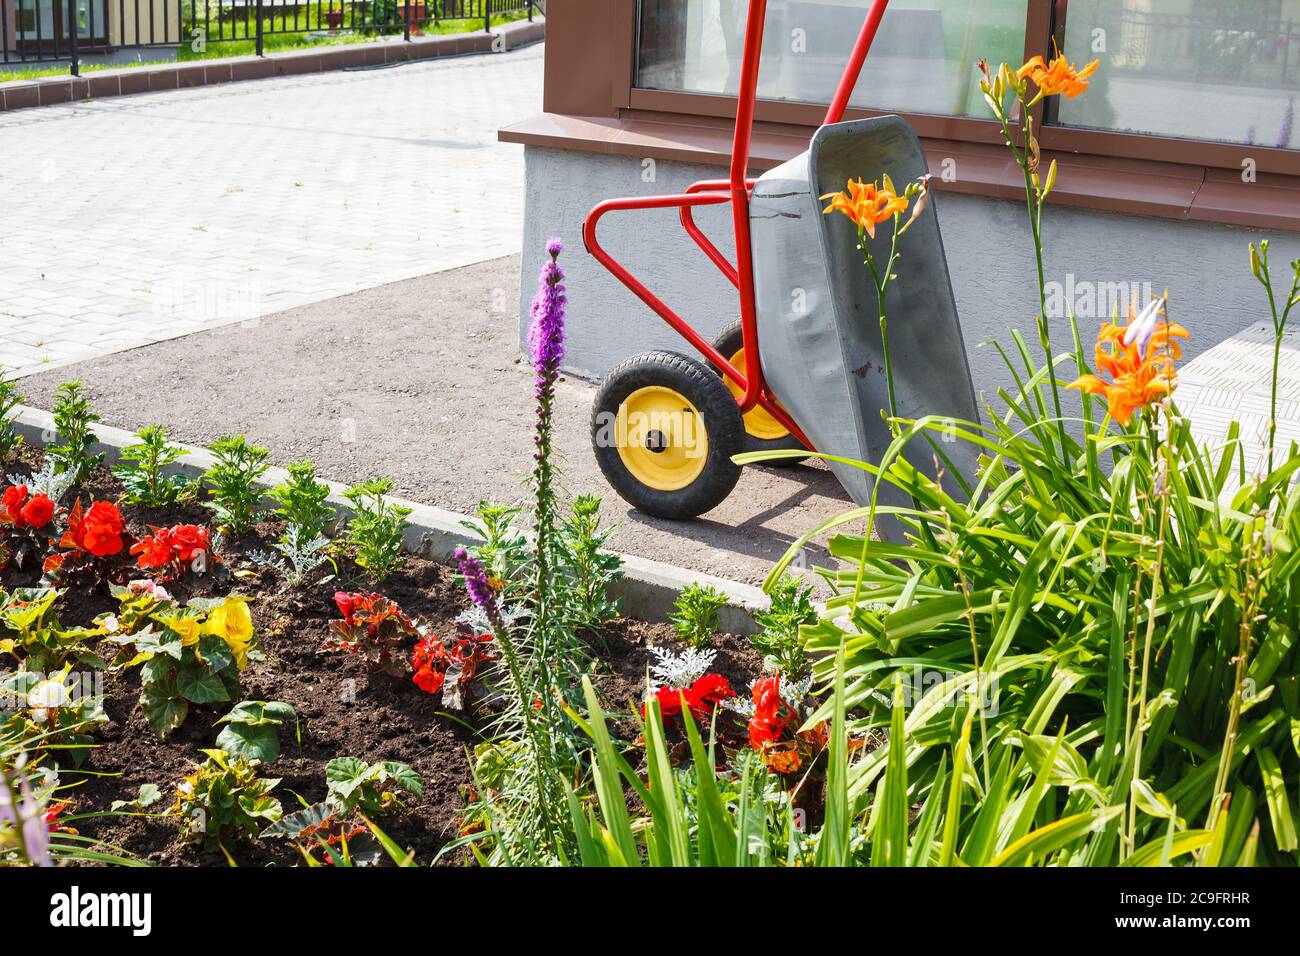 Side view on a metallic wheelbarrow with red handles and yellow wheels standing near colorful flower bed Stock Photo